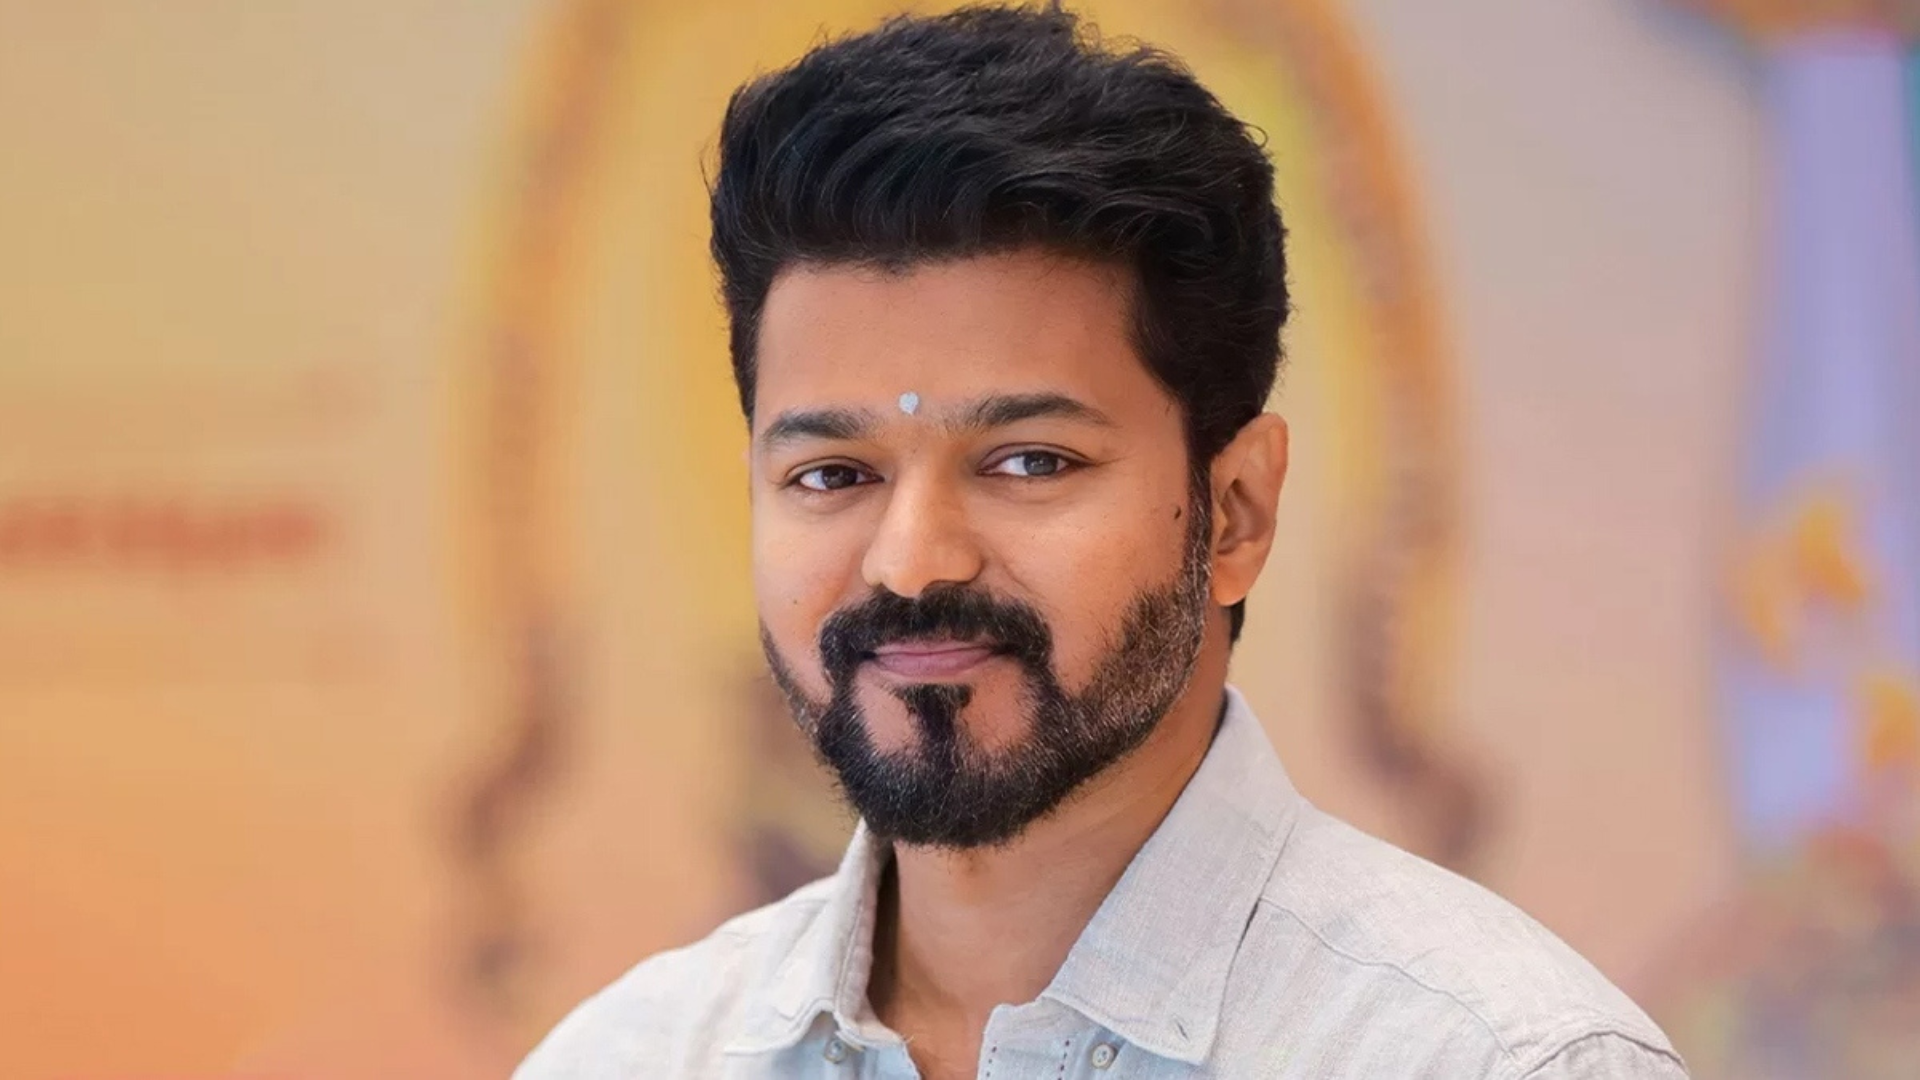 ‘GOAT’ by Thalapathy Vijay to be released in September